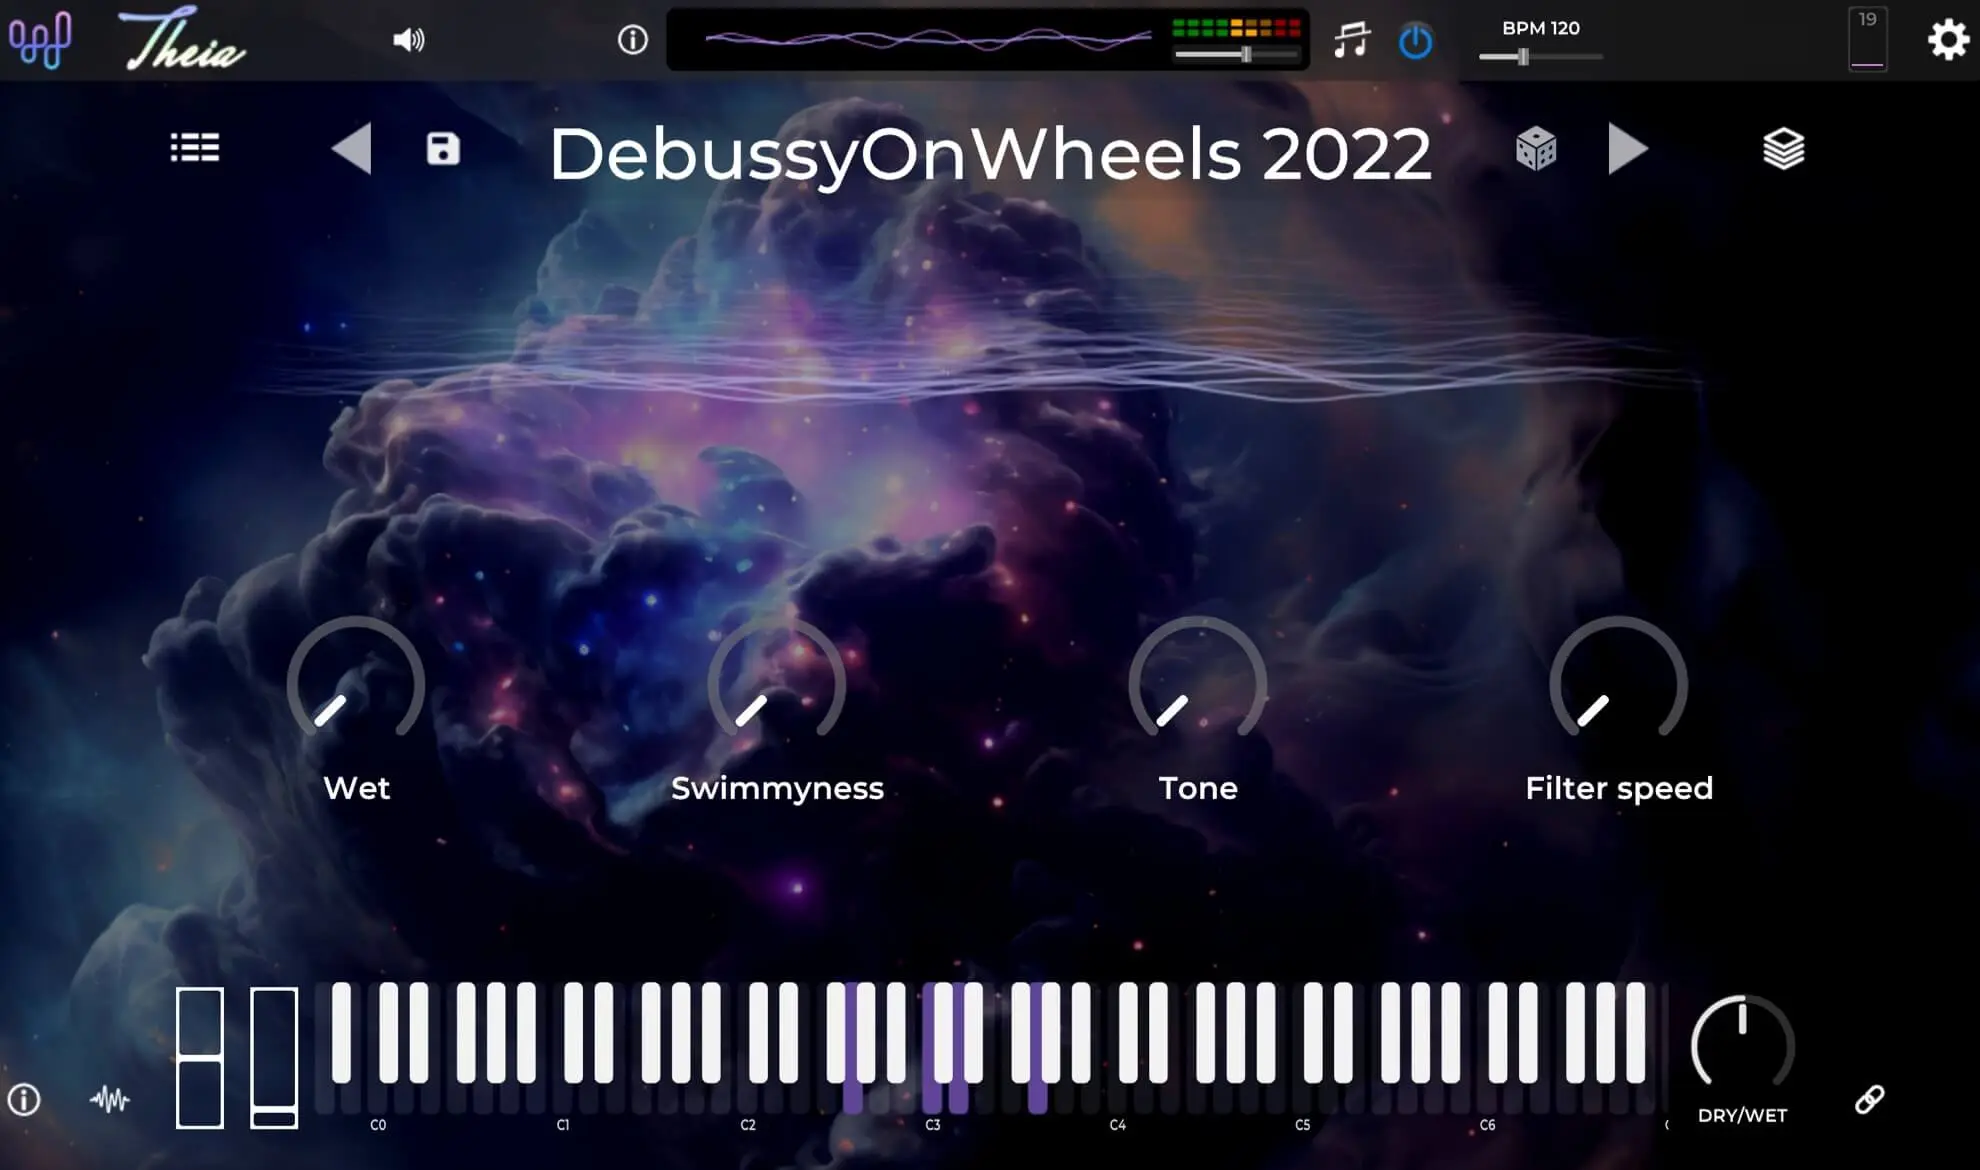 image to theia plugin show a piano with only white keys on background show a sky full of violet clouds.